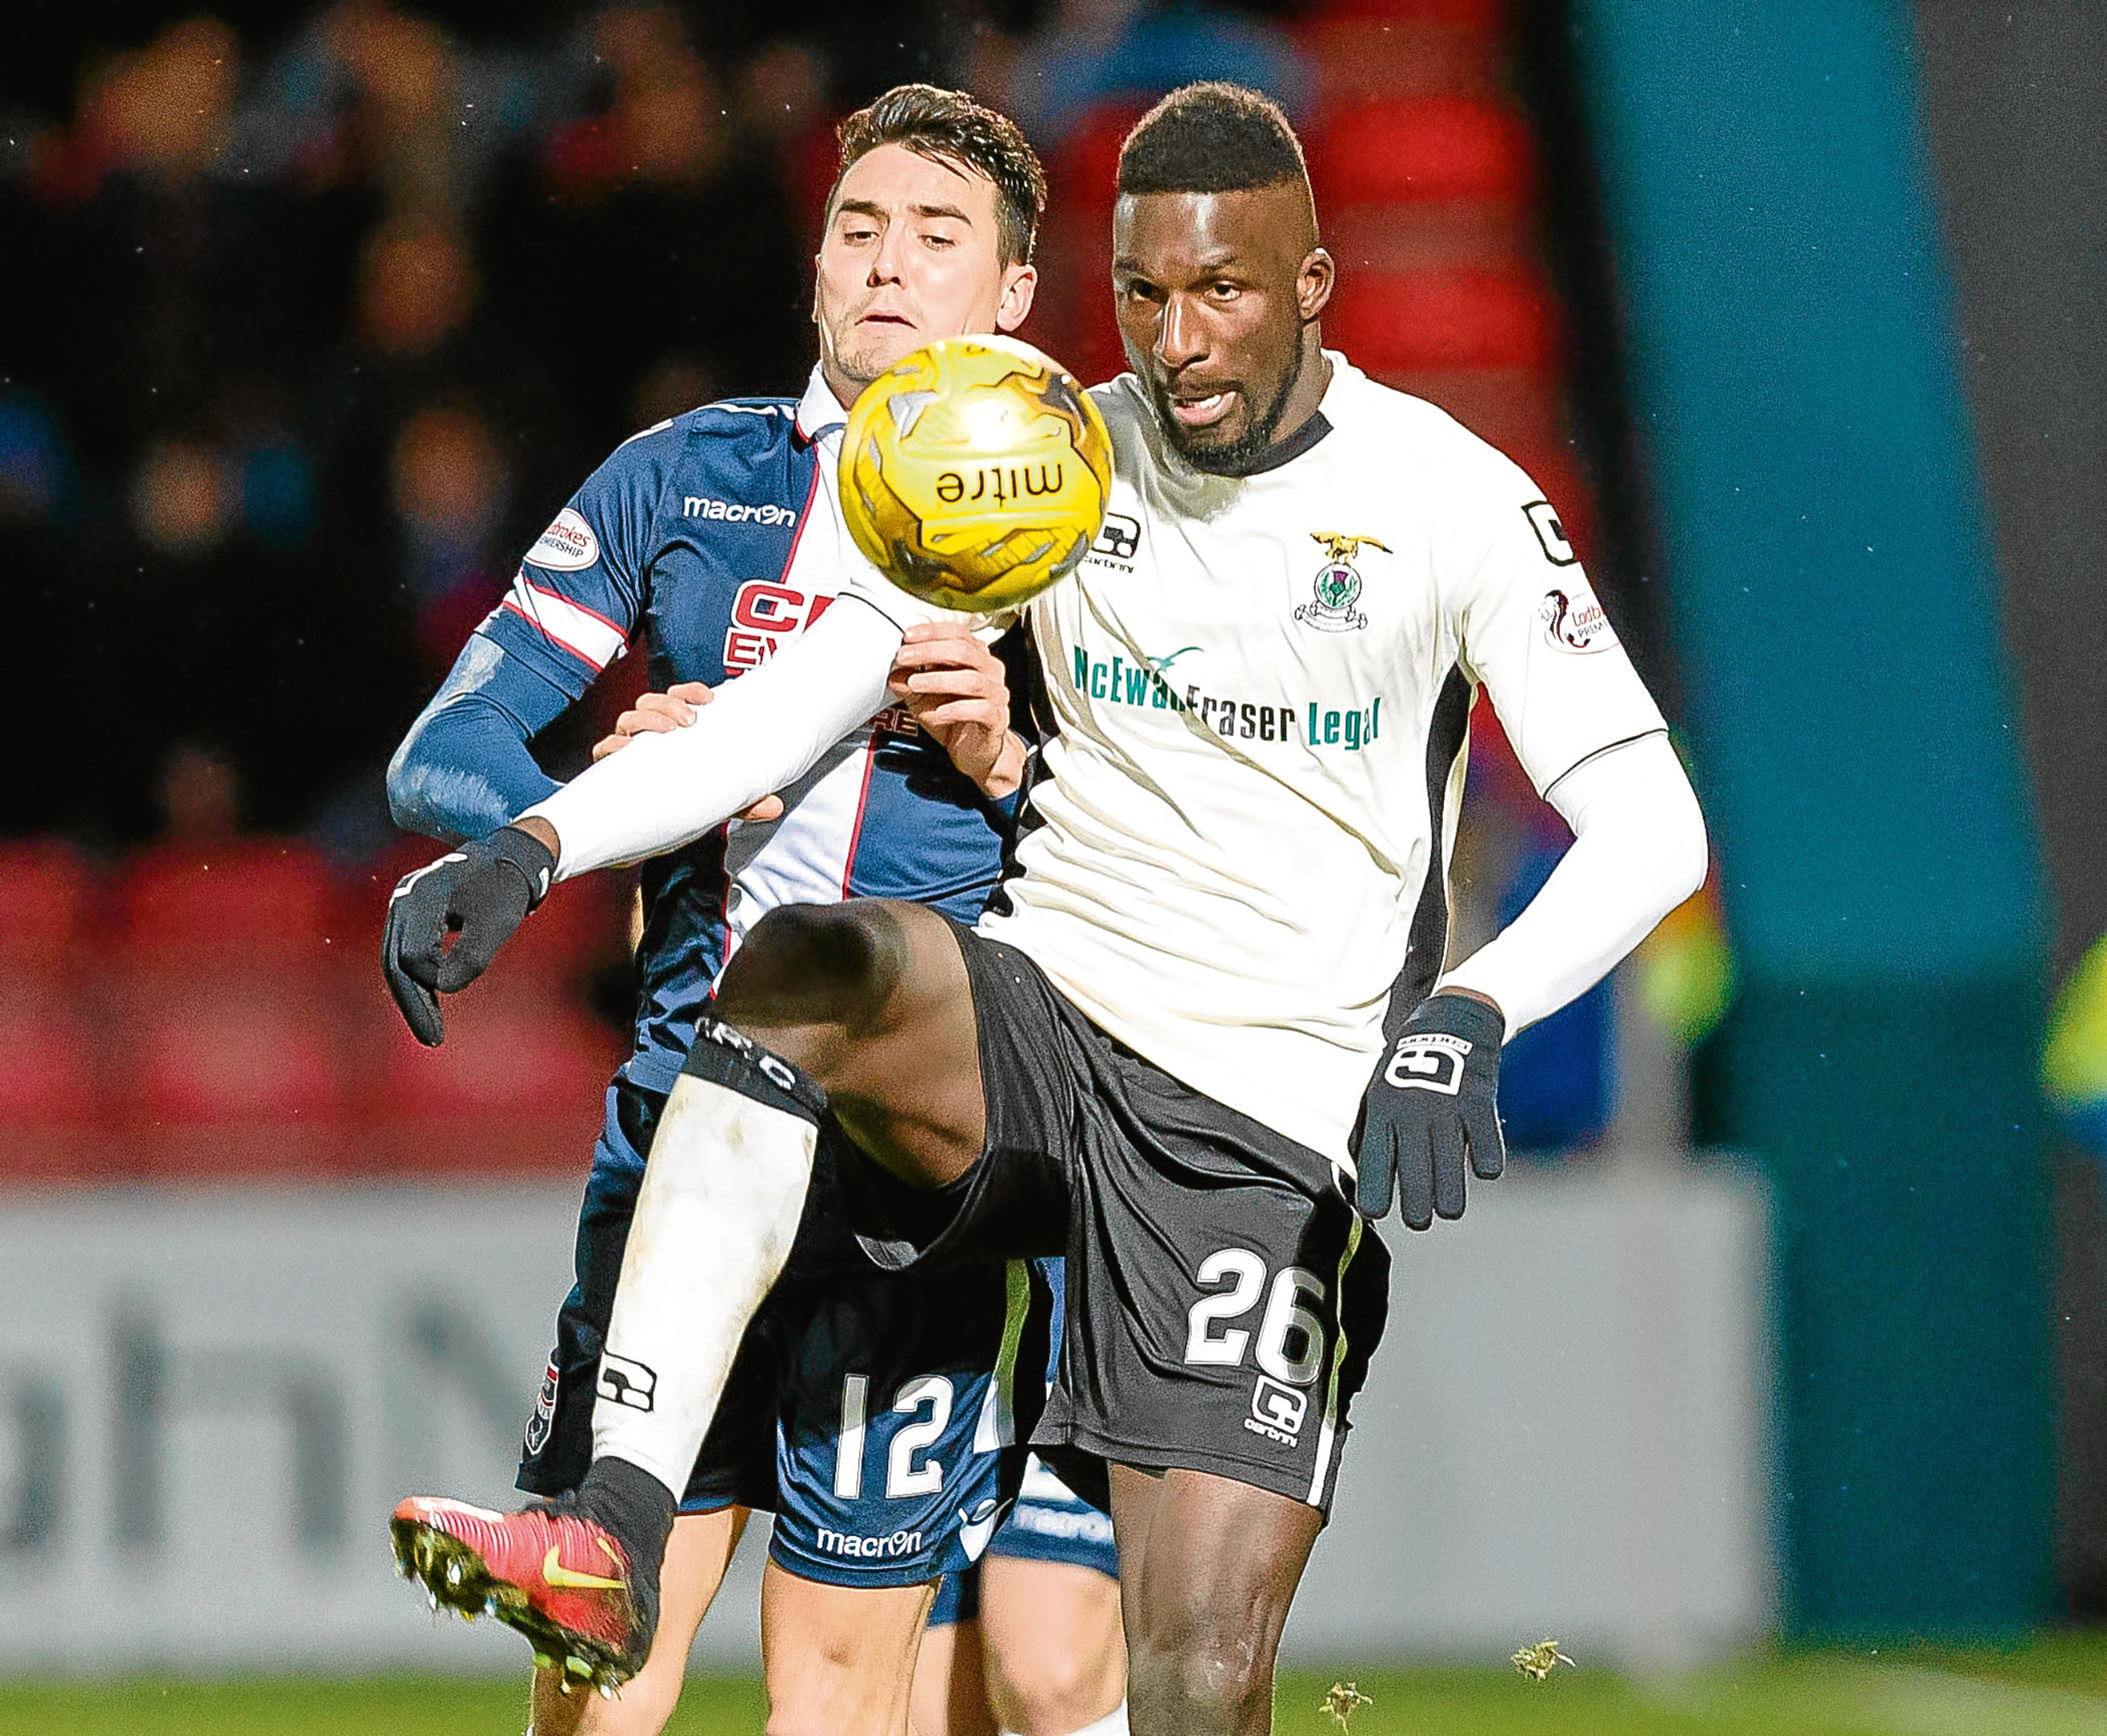 Tim Chow in action for Ross County against Caley Thistle's Lonsana Doumbouya in December 2016.